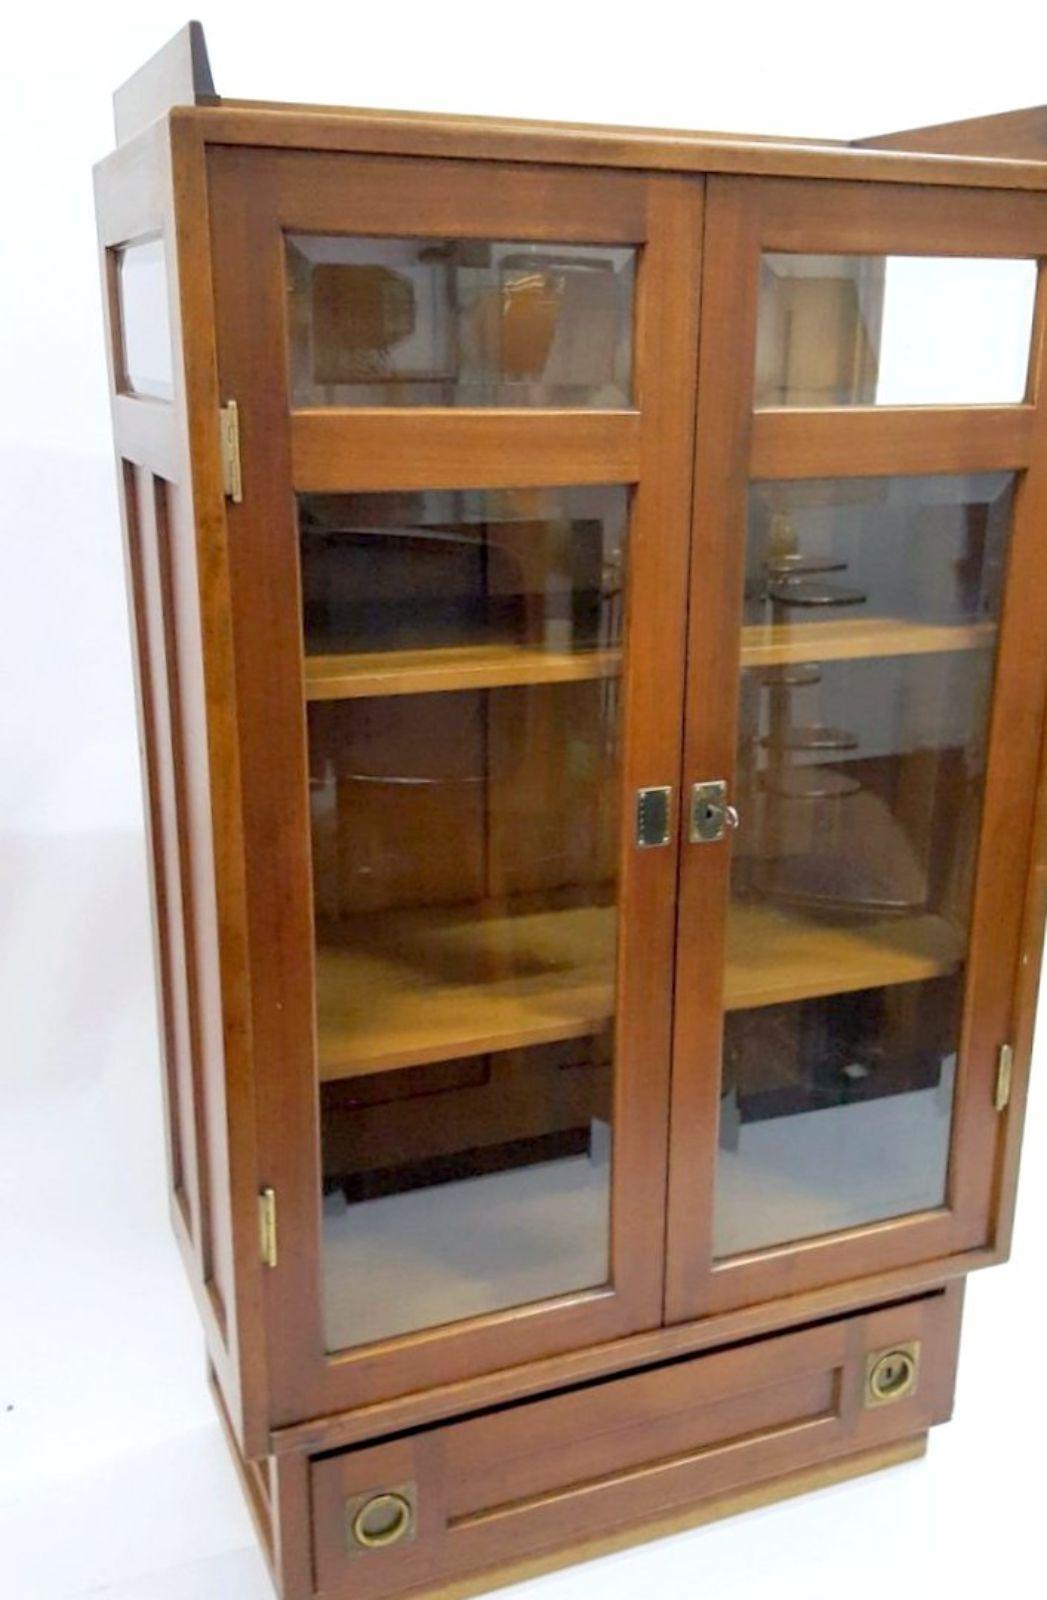 This rare, turn of the century bookcase, is made in the manner of Adolph Loos, from Austria, by Erstes Wiener Möbelheim. Adjustable shelfes, and extraordinary cut glass and woodwork, are the features of this bookcase. With some damage on the top,